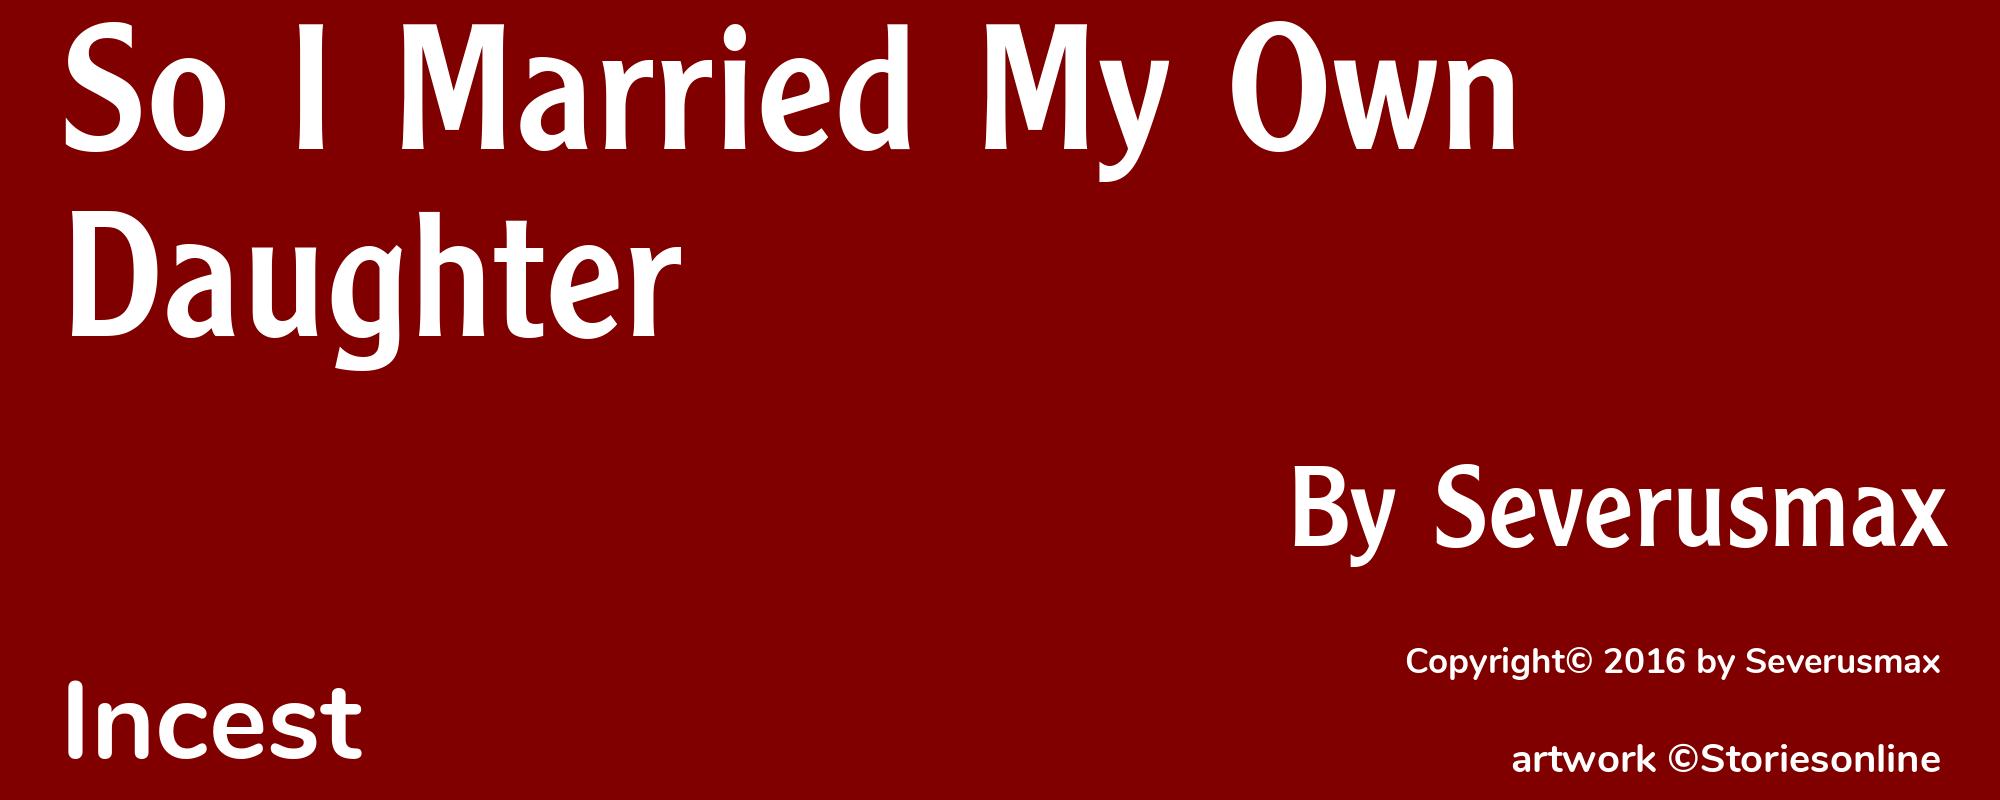 So I Married My Own Daughter - Cover